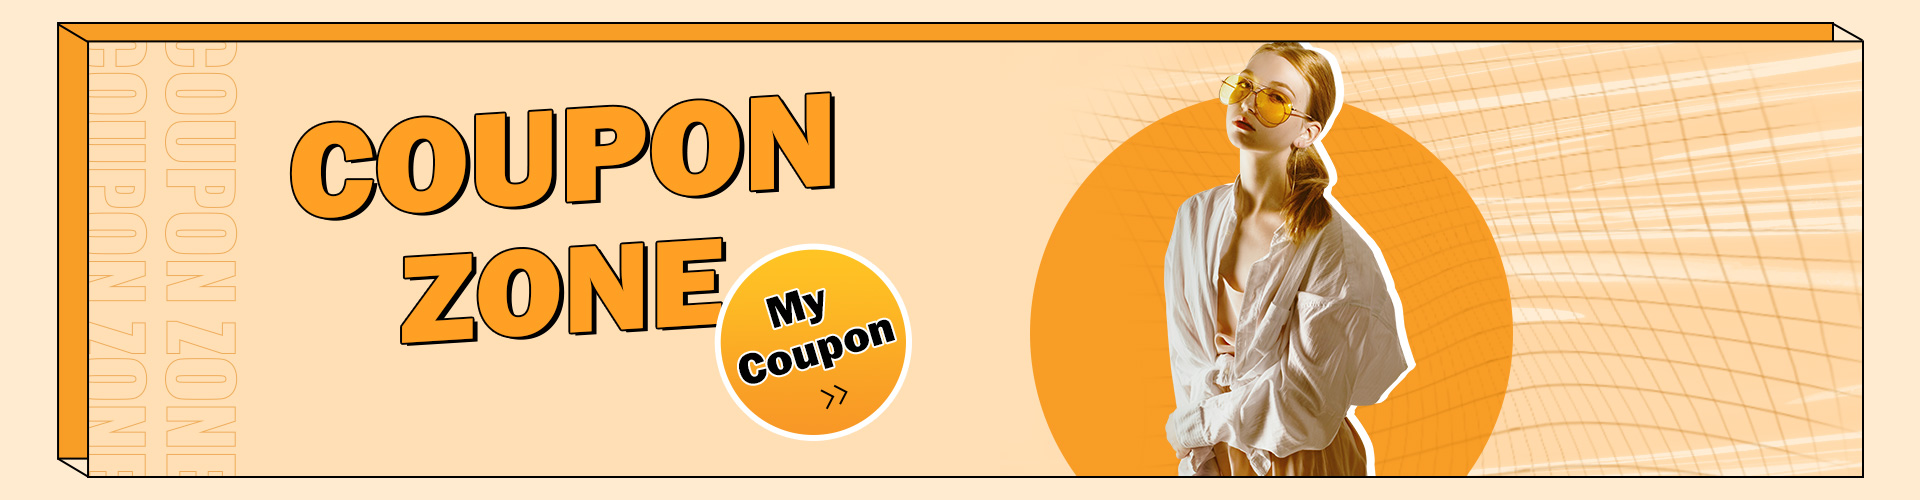 W7 Coupon Center Zone Perfect Coupons